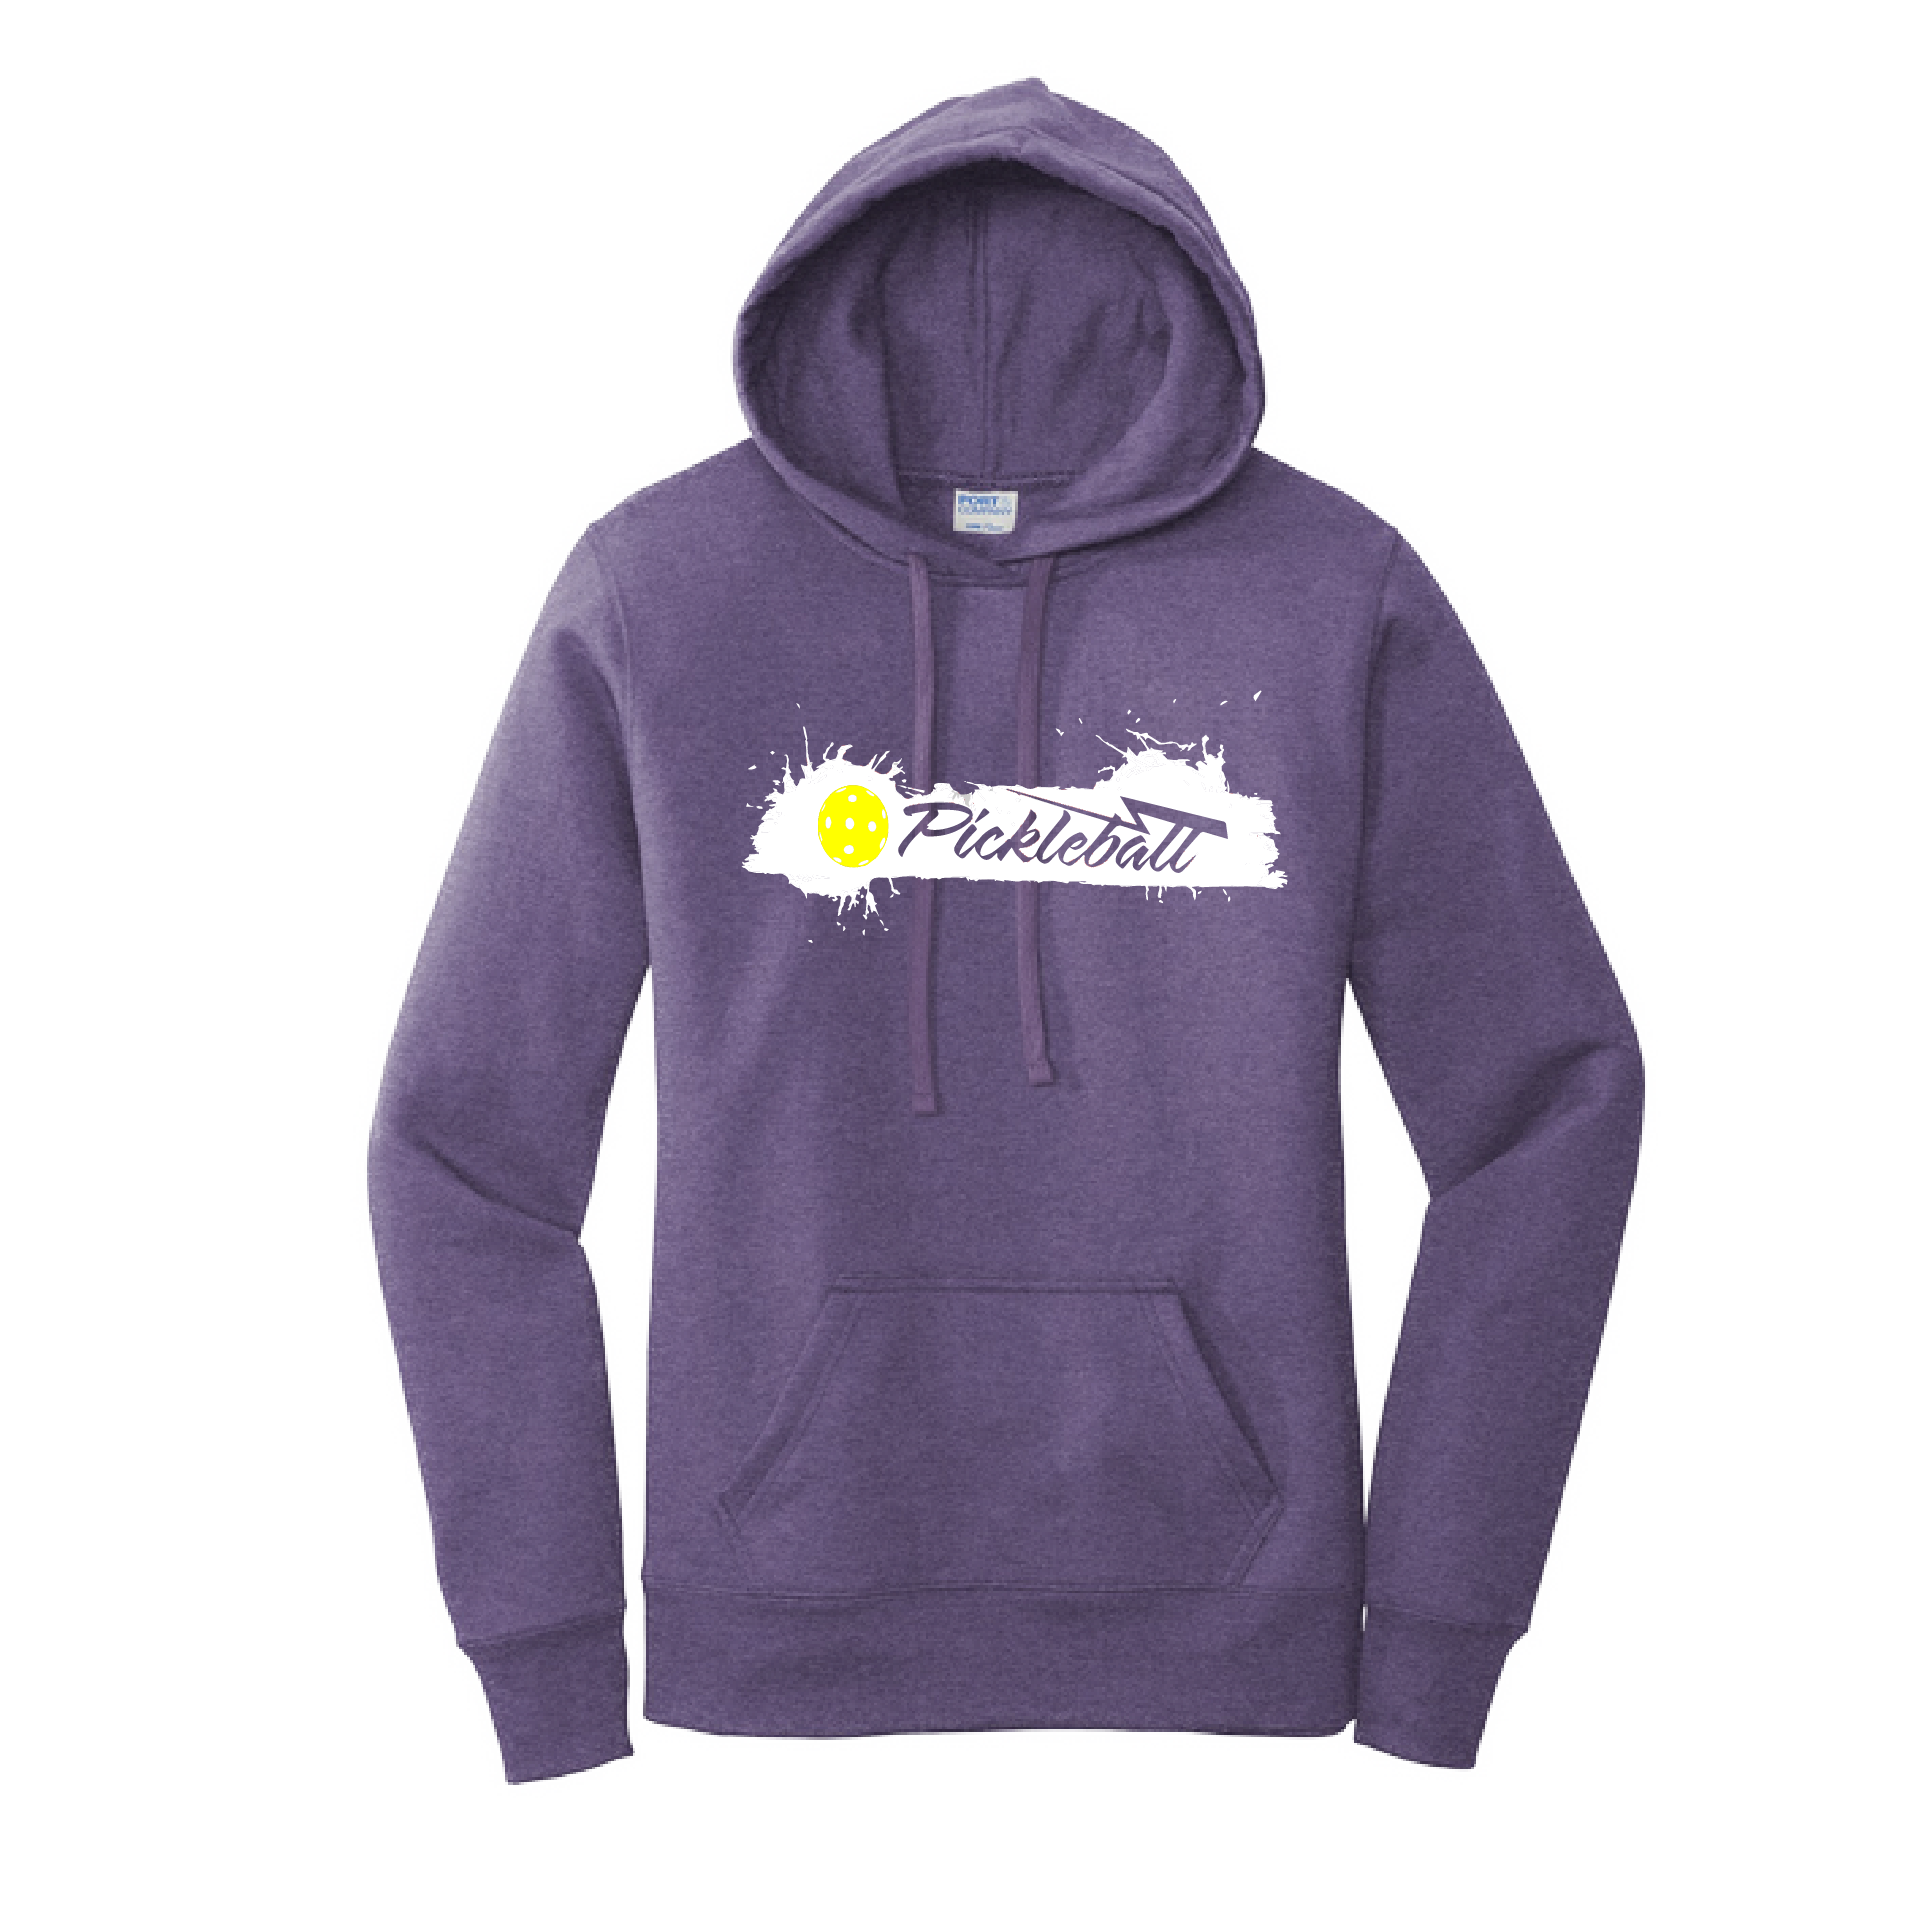 Pickleball Design: Extreme  Women's Hooded pullover Sweatshirt  Turn up the volume in this Women's Sweatshirts with its perfect mix of softness and attitude. Ultra soft lined inside with a lined hood also. This is fitted nicely for a women's figure. Front pouch pocket.